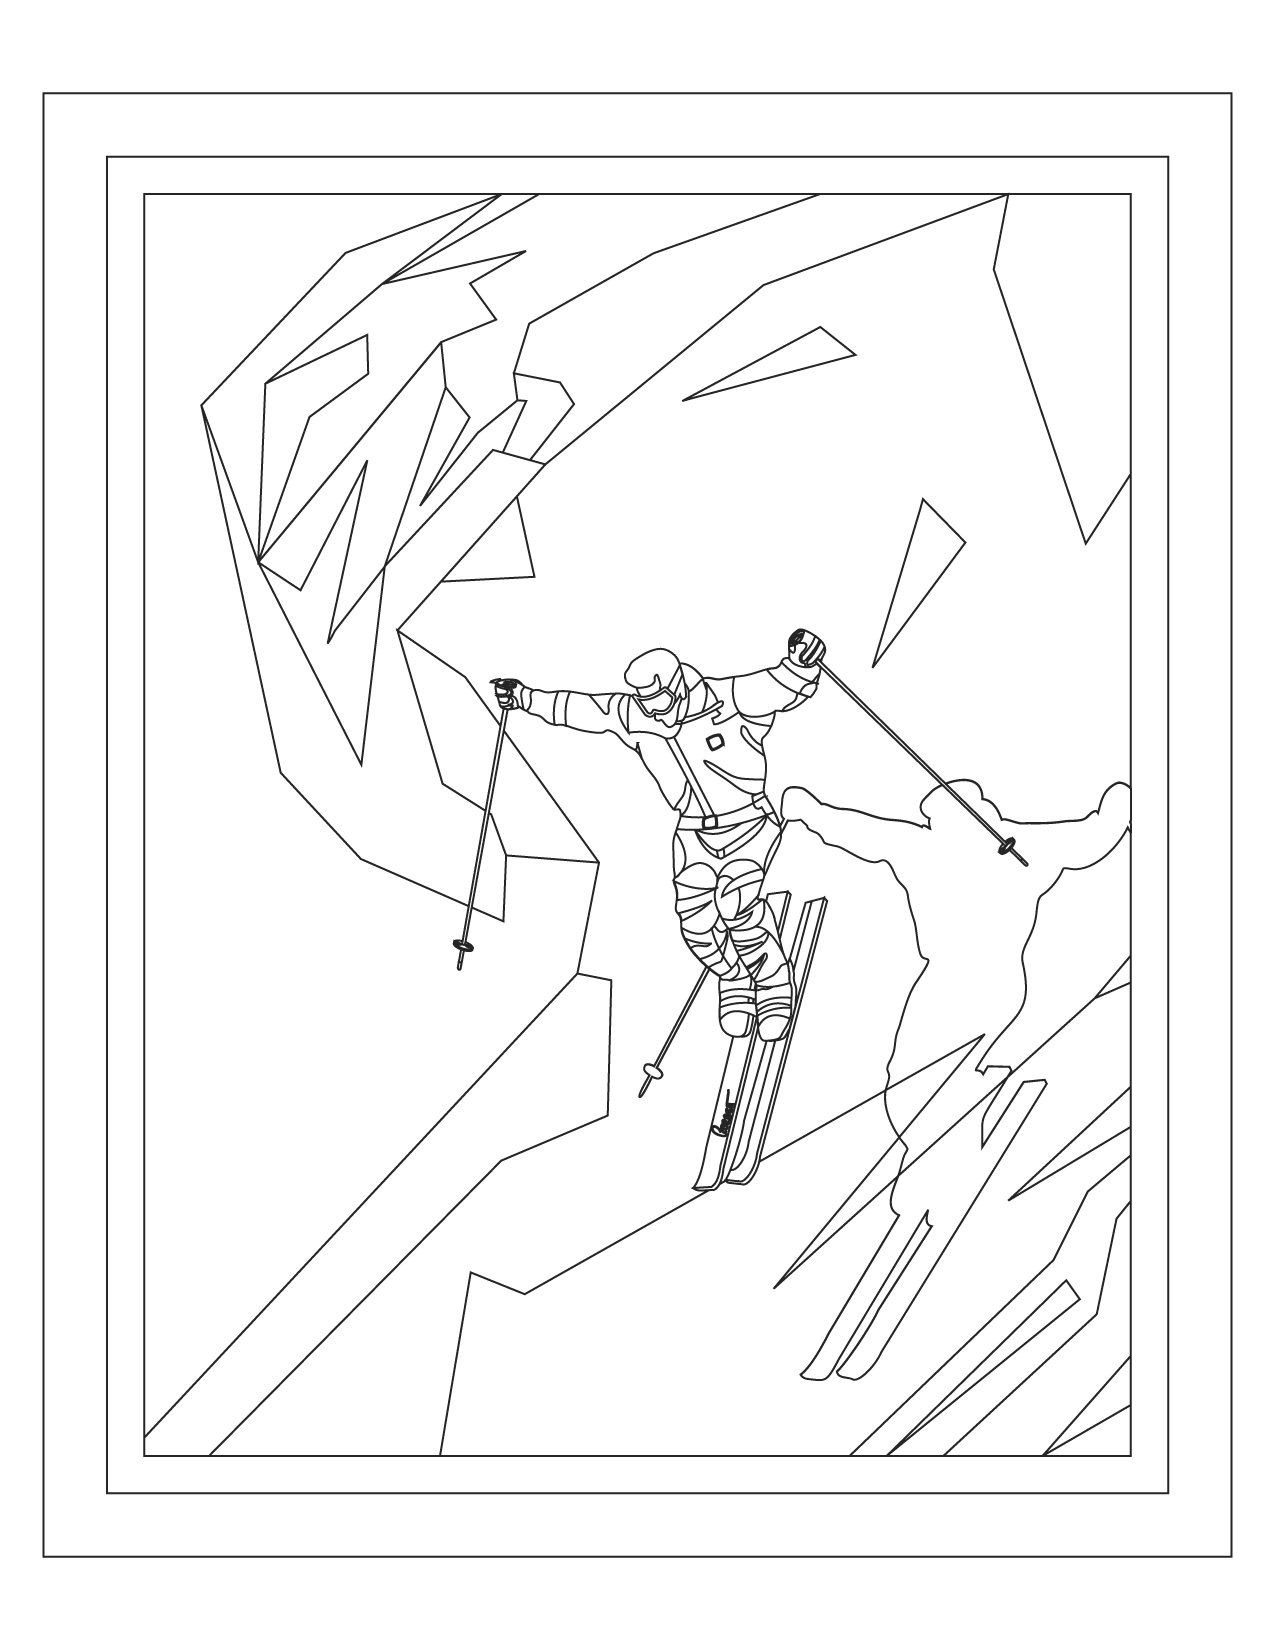 Skiing Down A Mountain Coloring Page